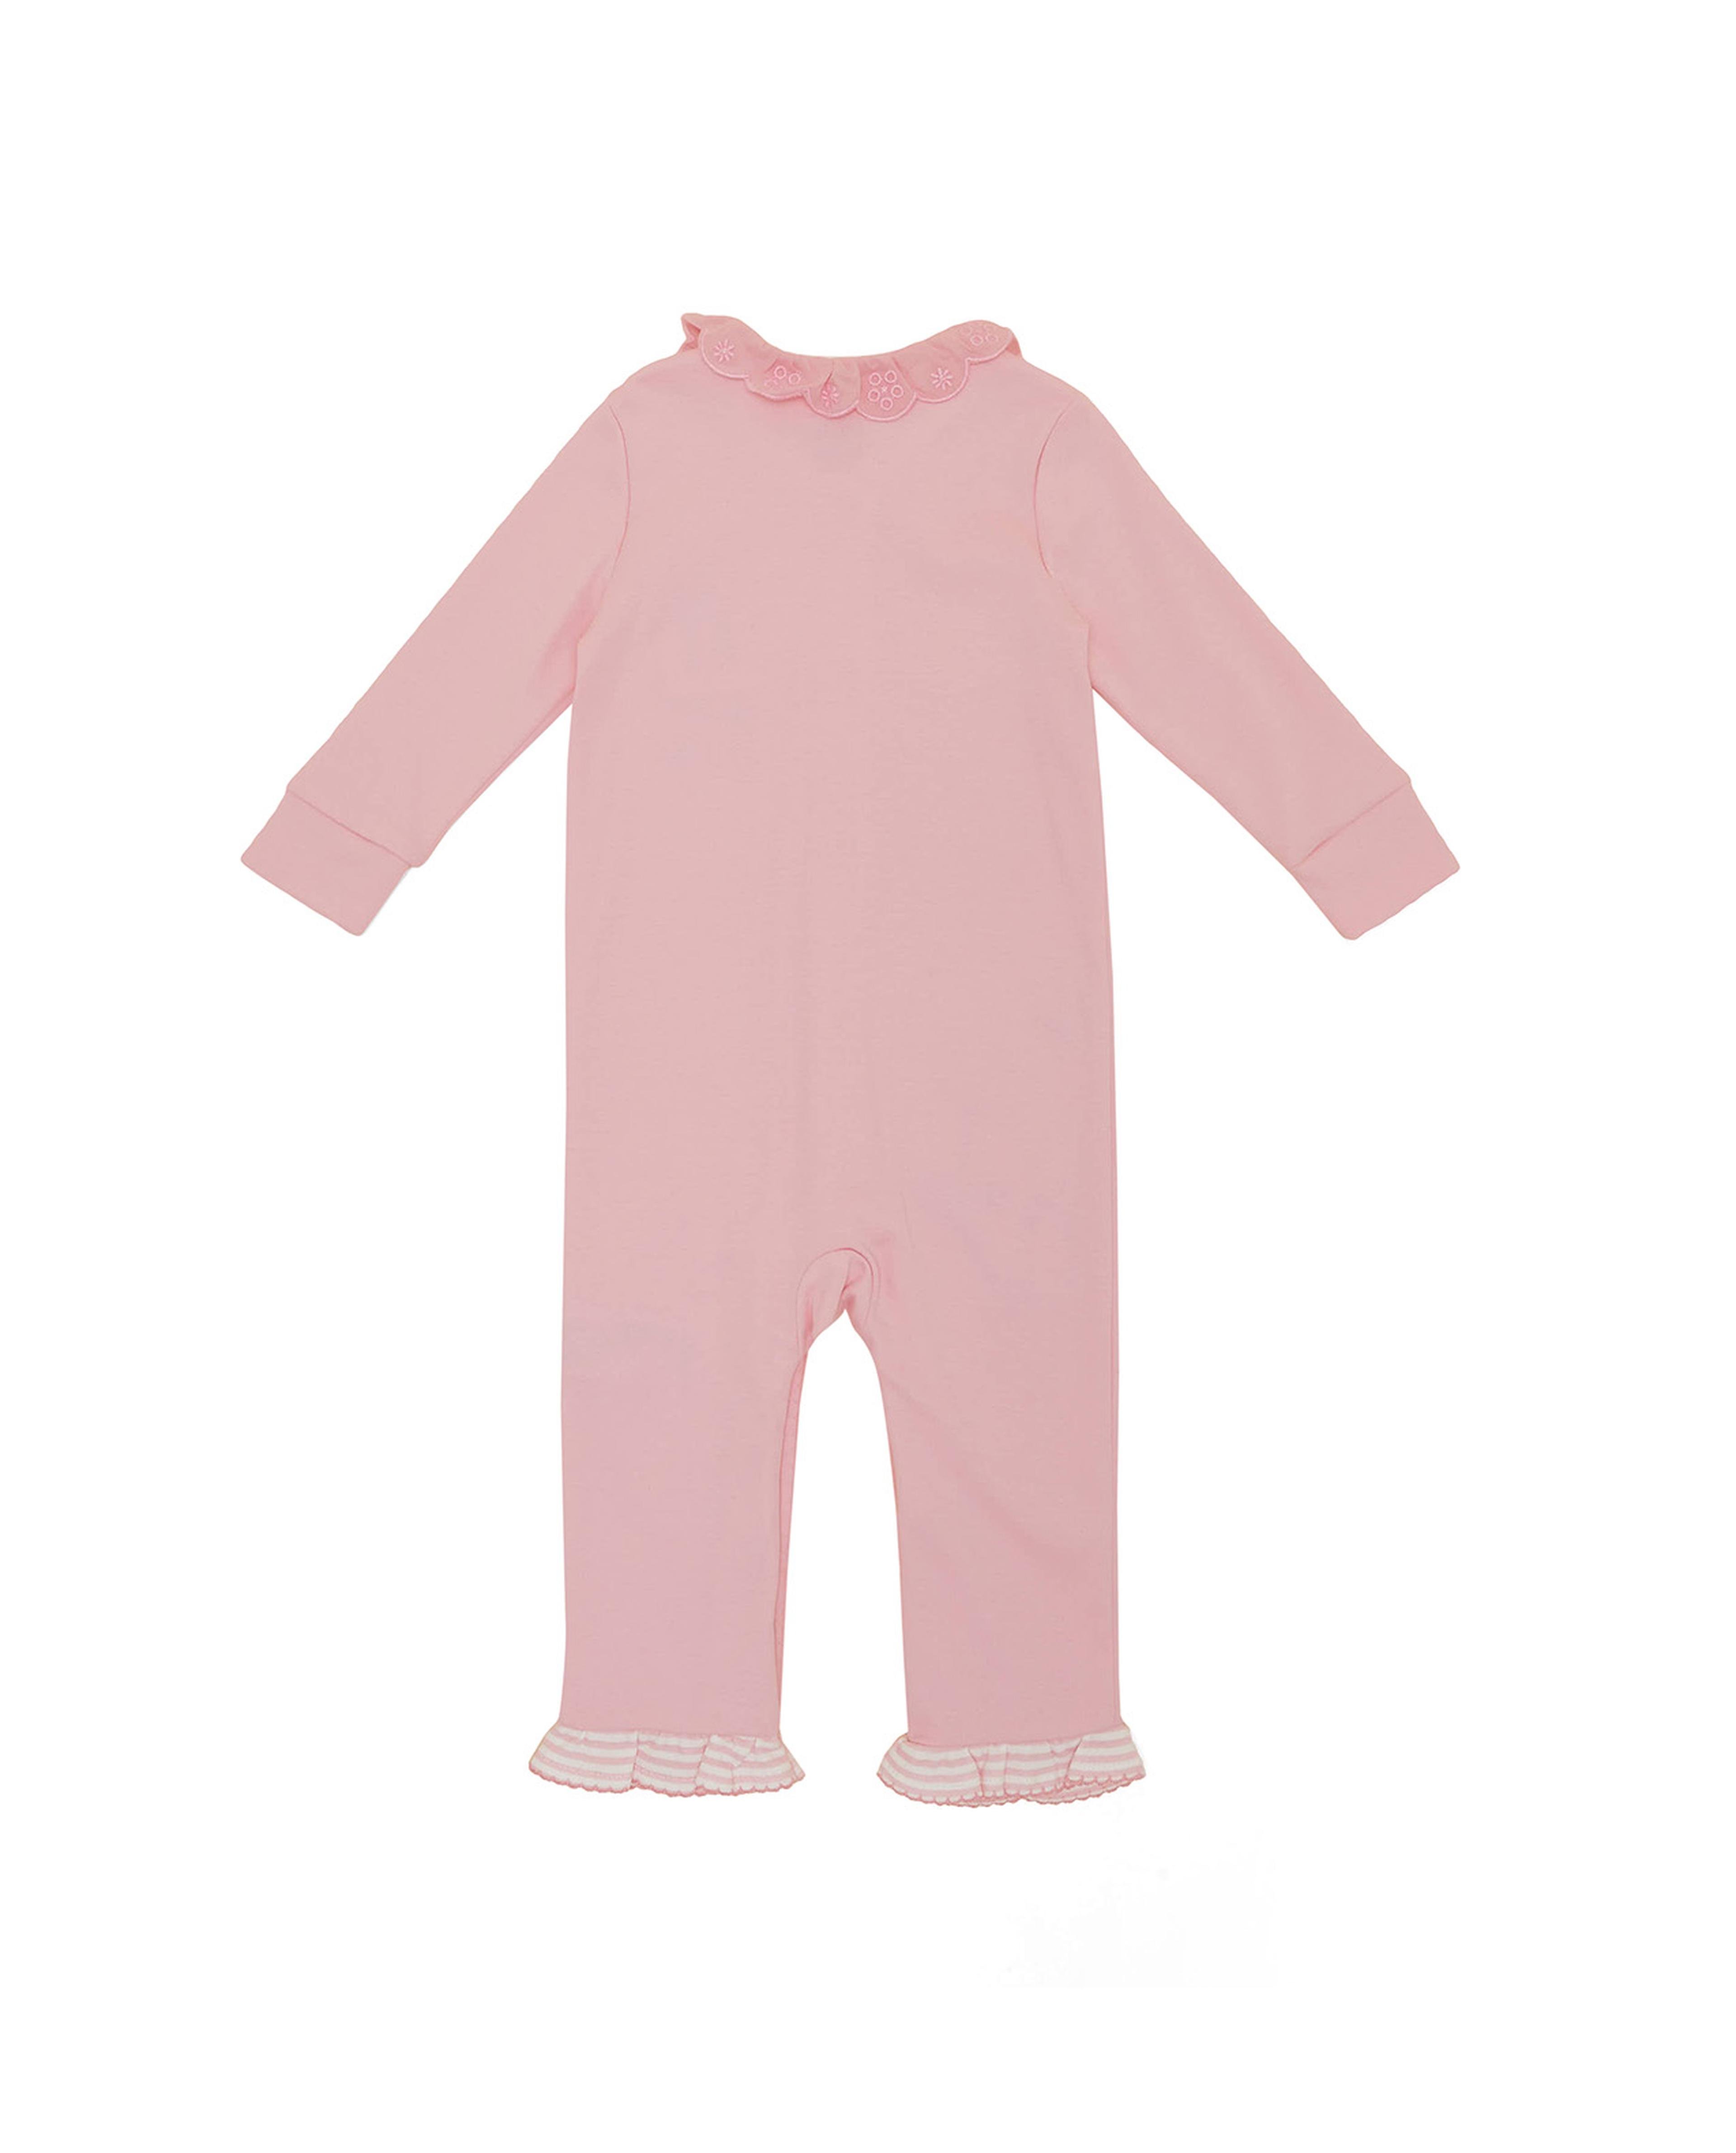 Embroidered Sleepsuit with Long Sleeves